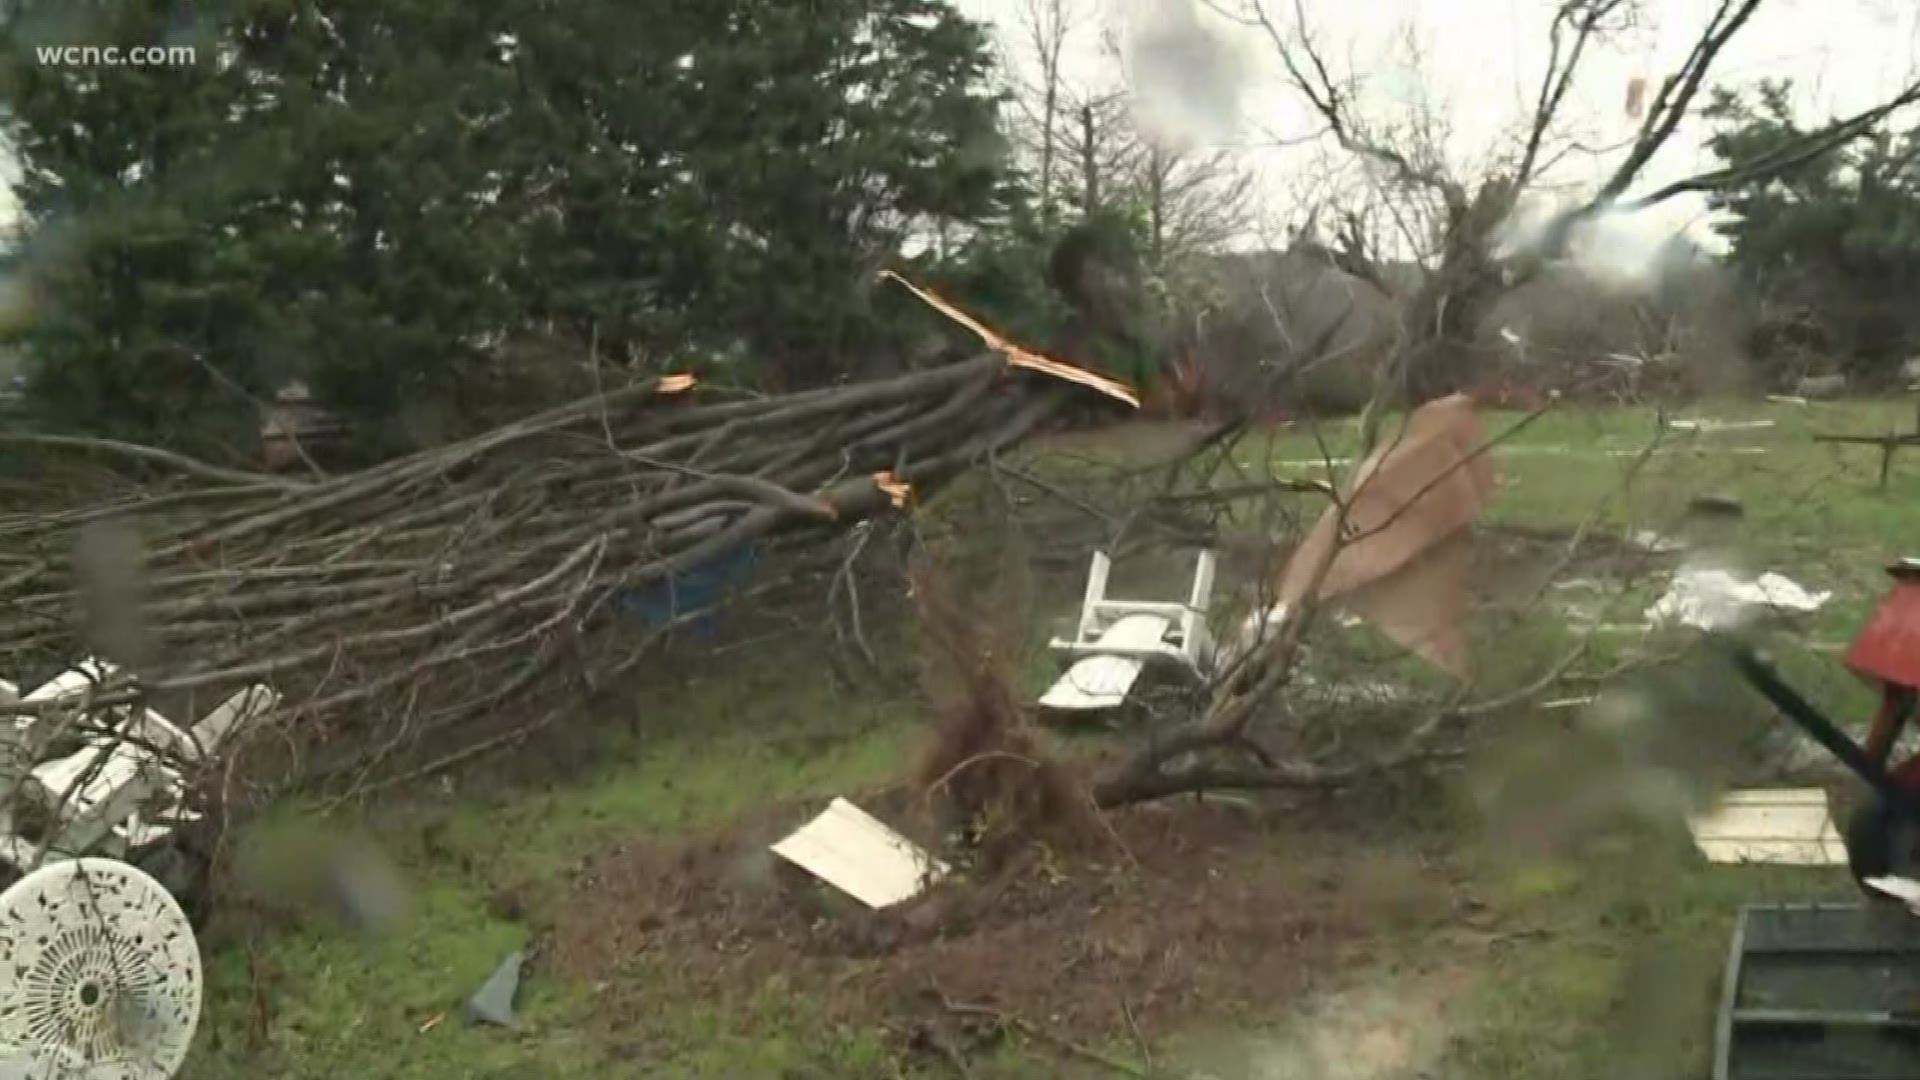 A 16-year-old boy says he was inside a home when a tornado hit his family's neighborhood Thursday.